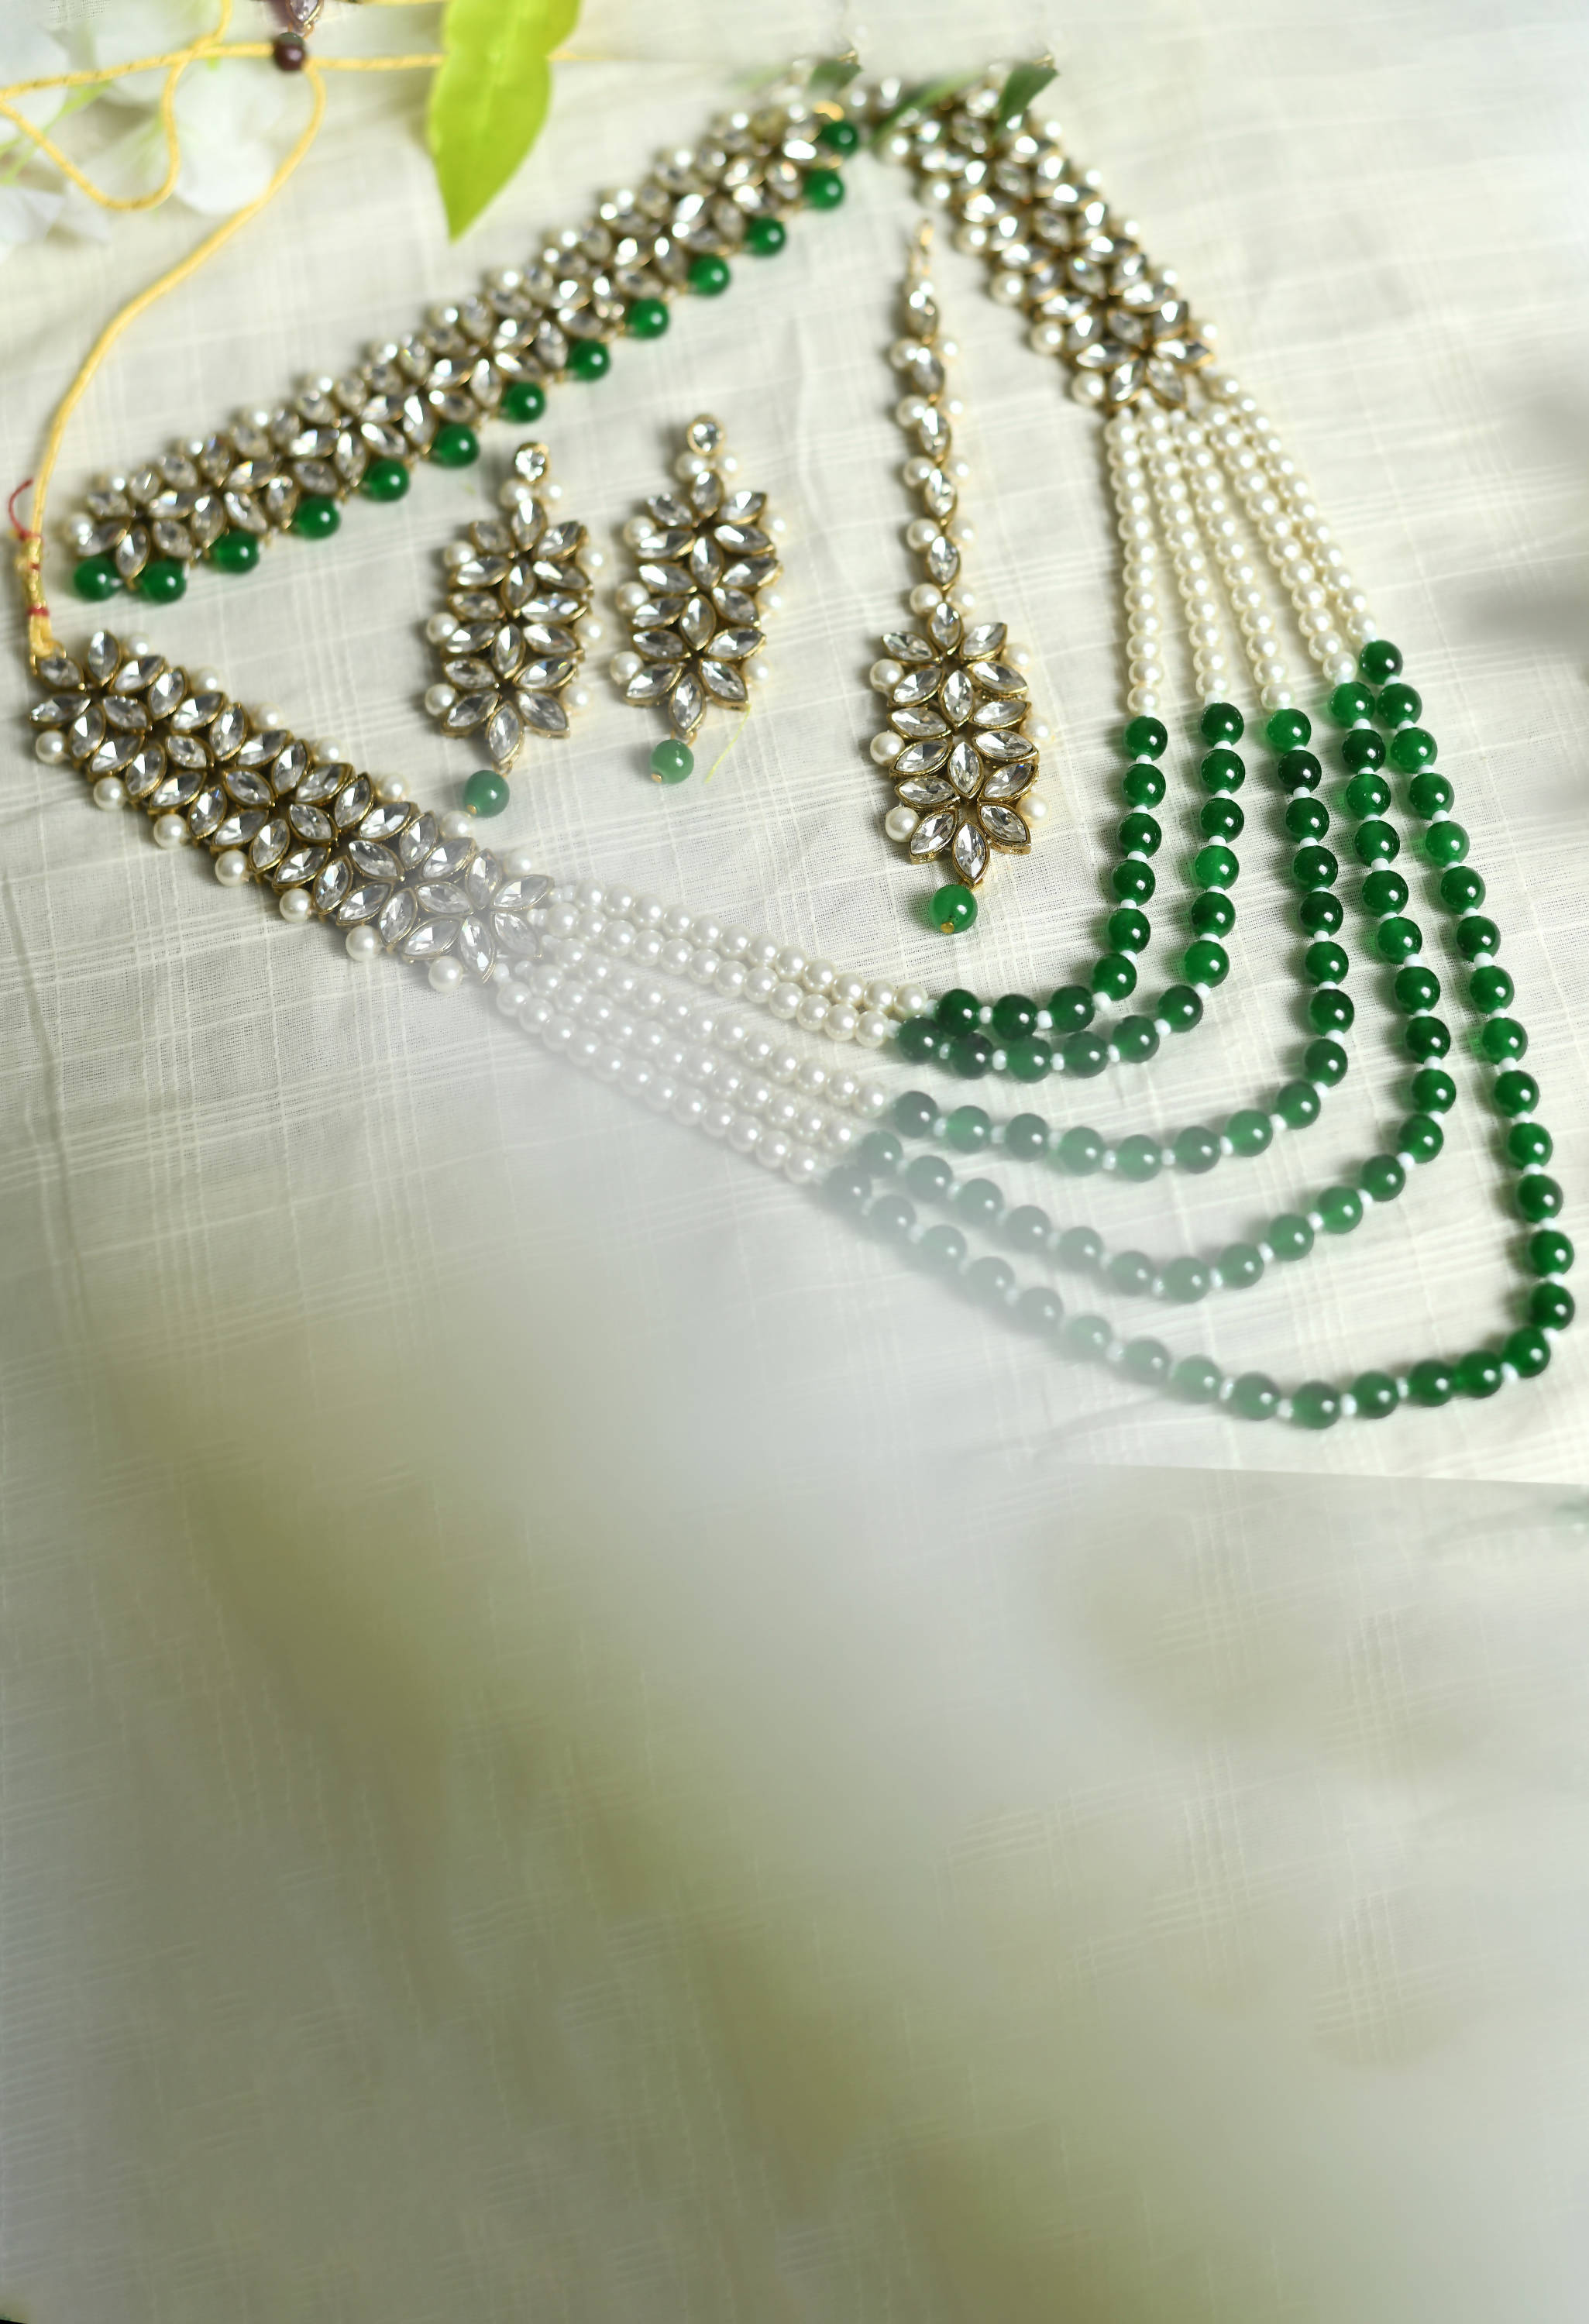 Johar Kamal Golden Plated with stone and green Pearls Necklace Combo Set Jkms_127